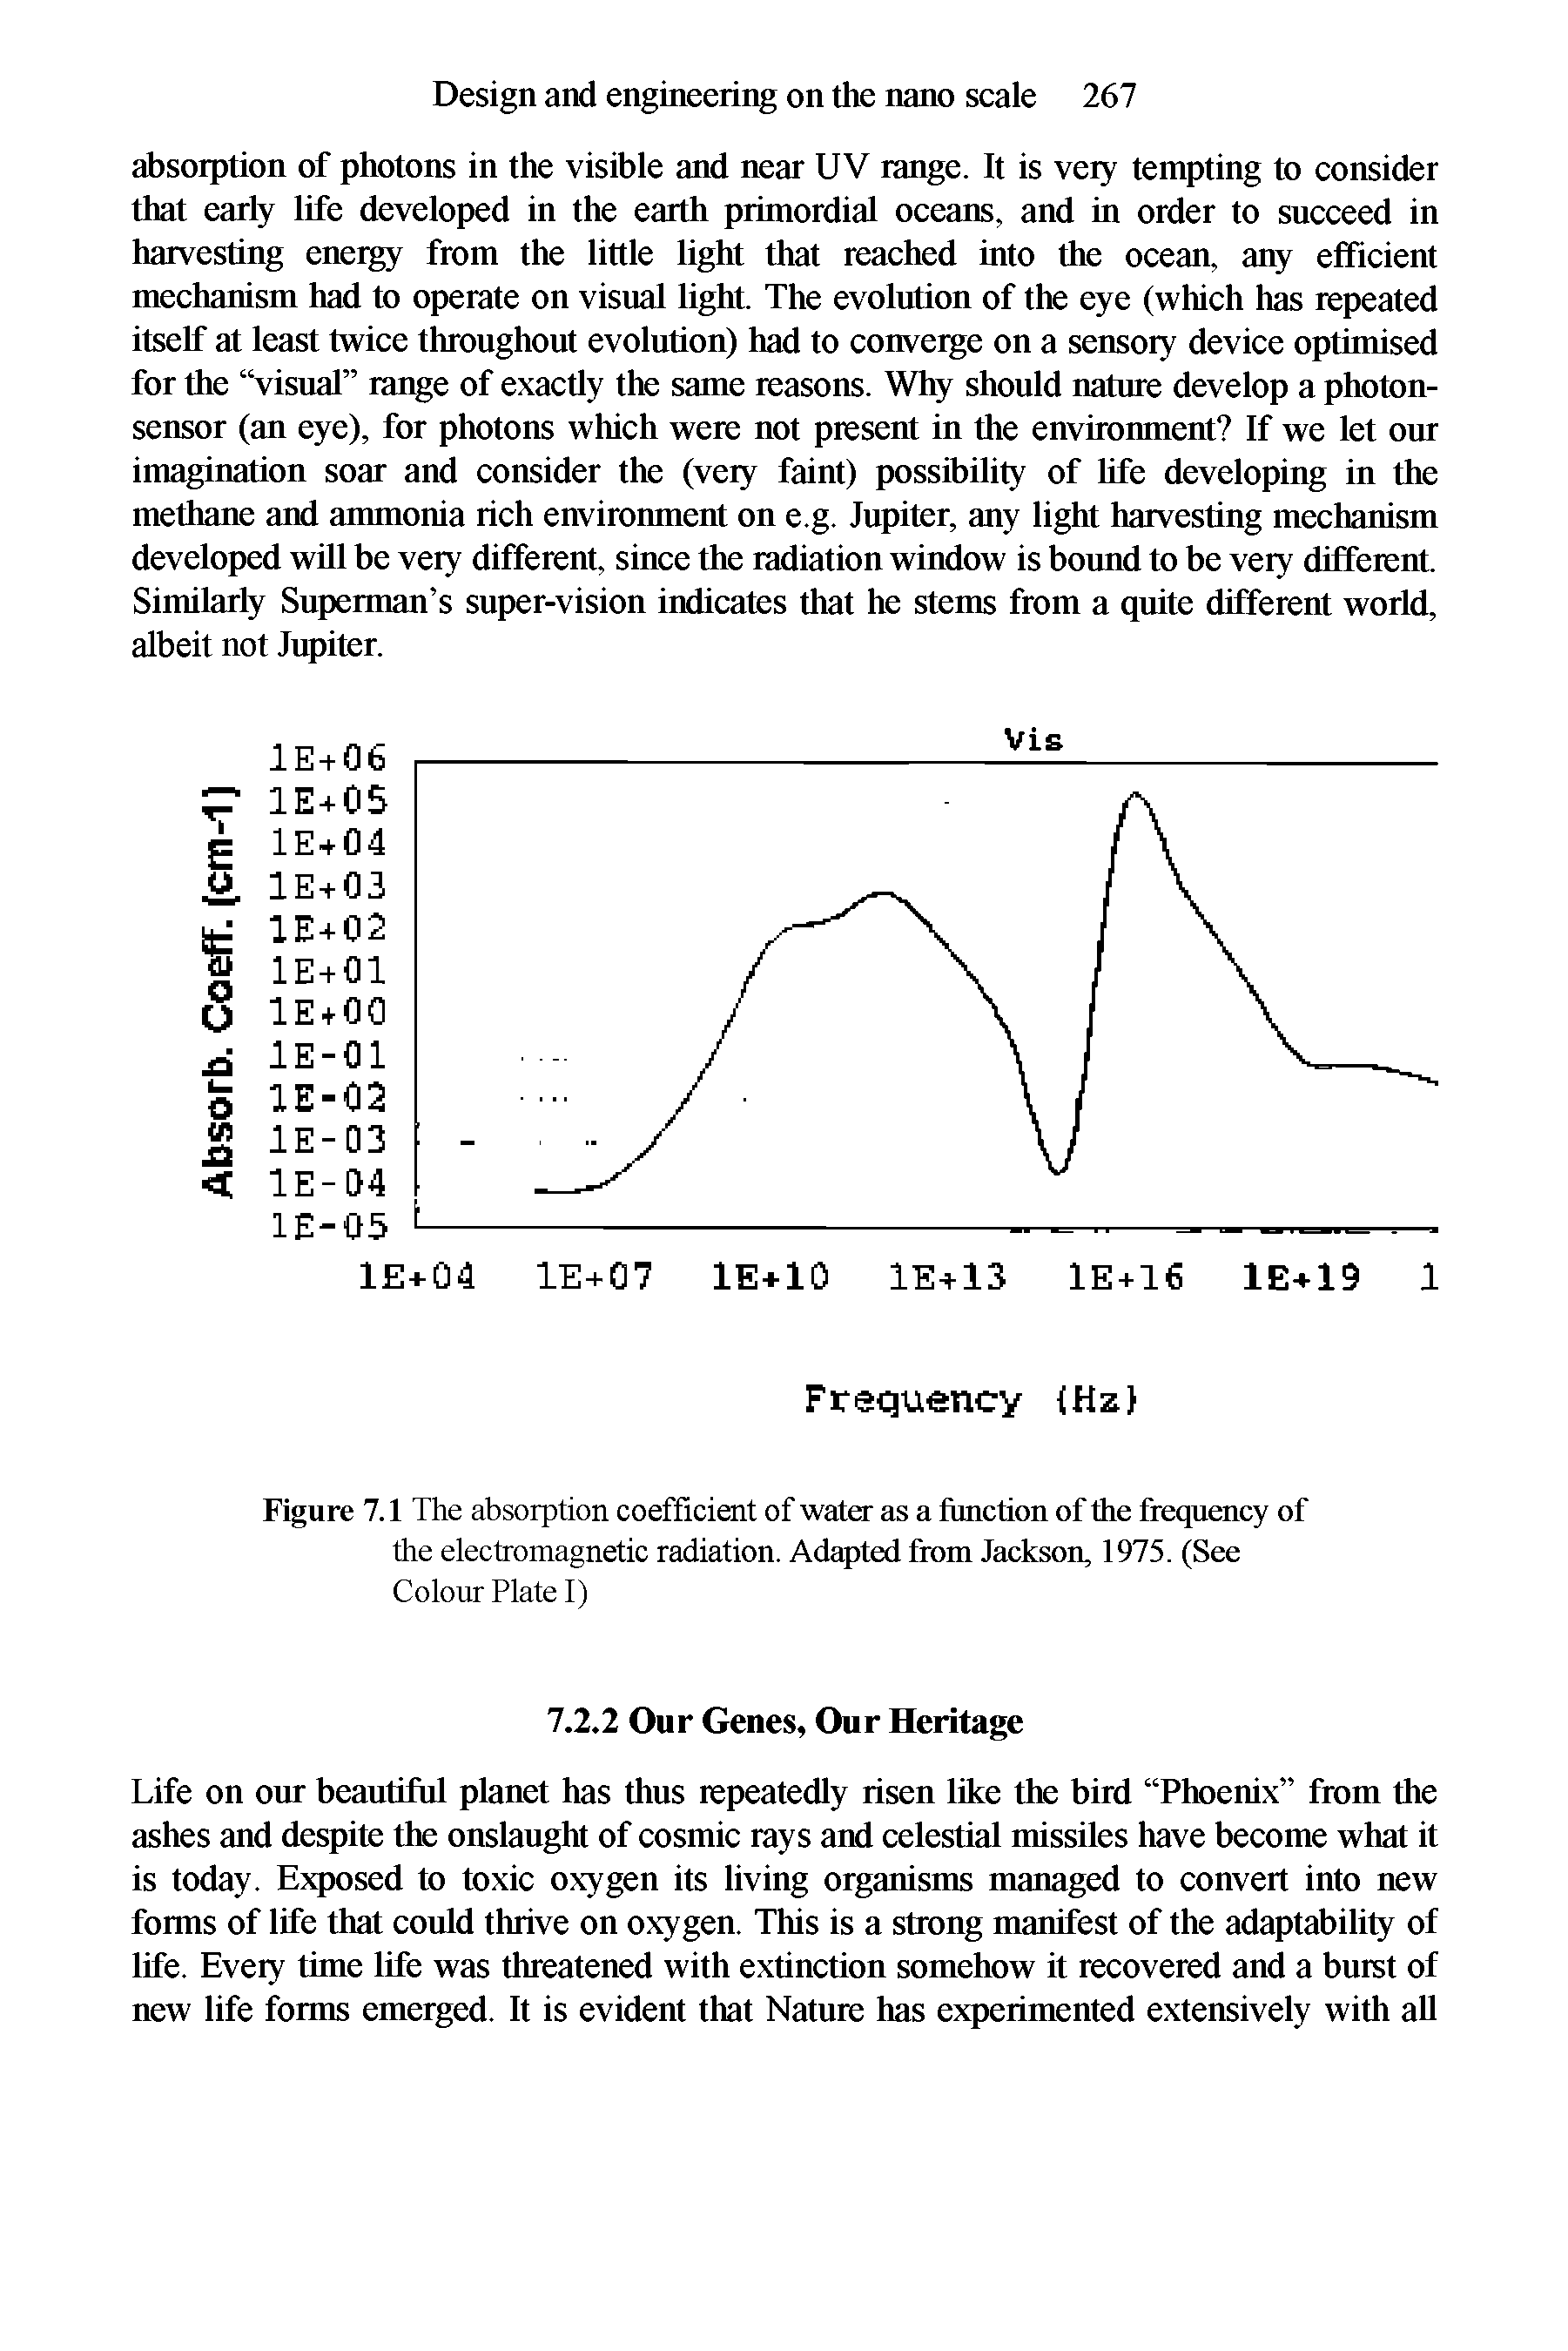 Figure 7.1 The absorption coefficient of water as a function of the frequency of the electromagnetic radiation. Adapted from Jackson, 1975. (See Colour Plate 1)...